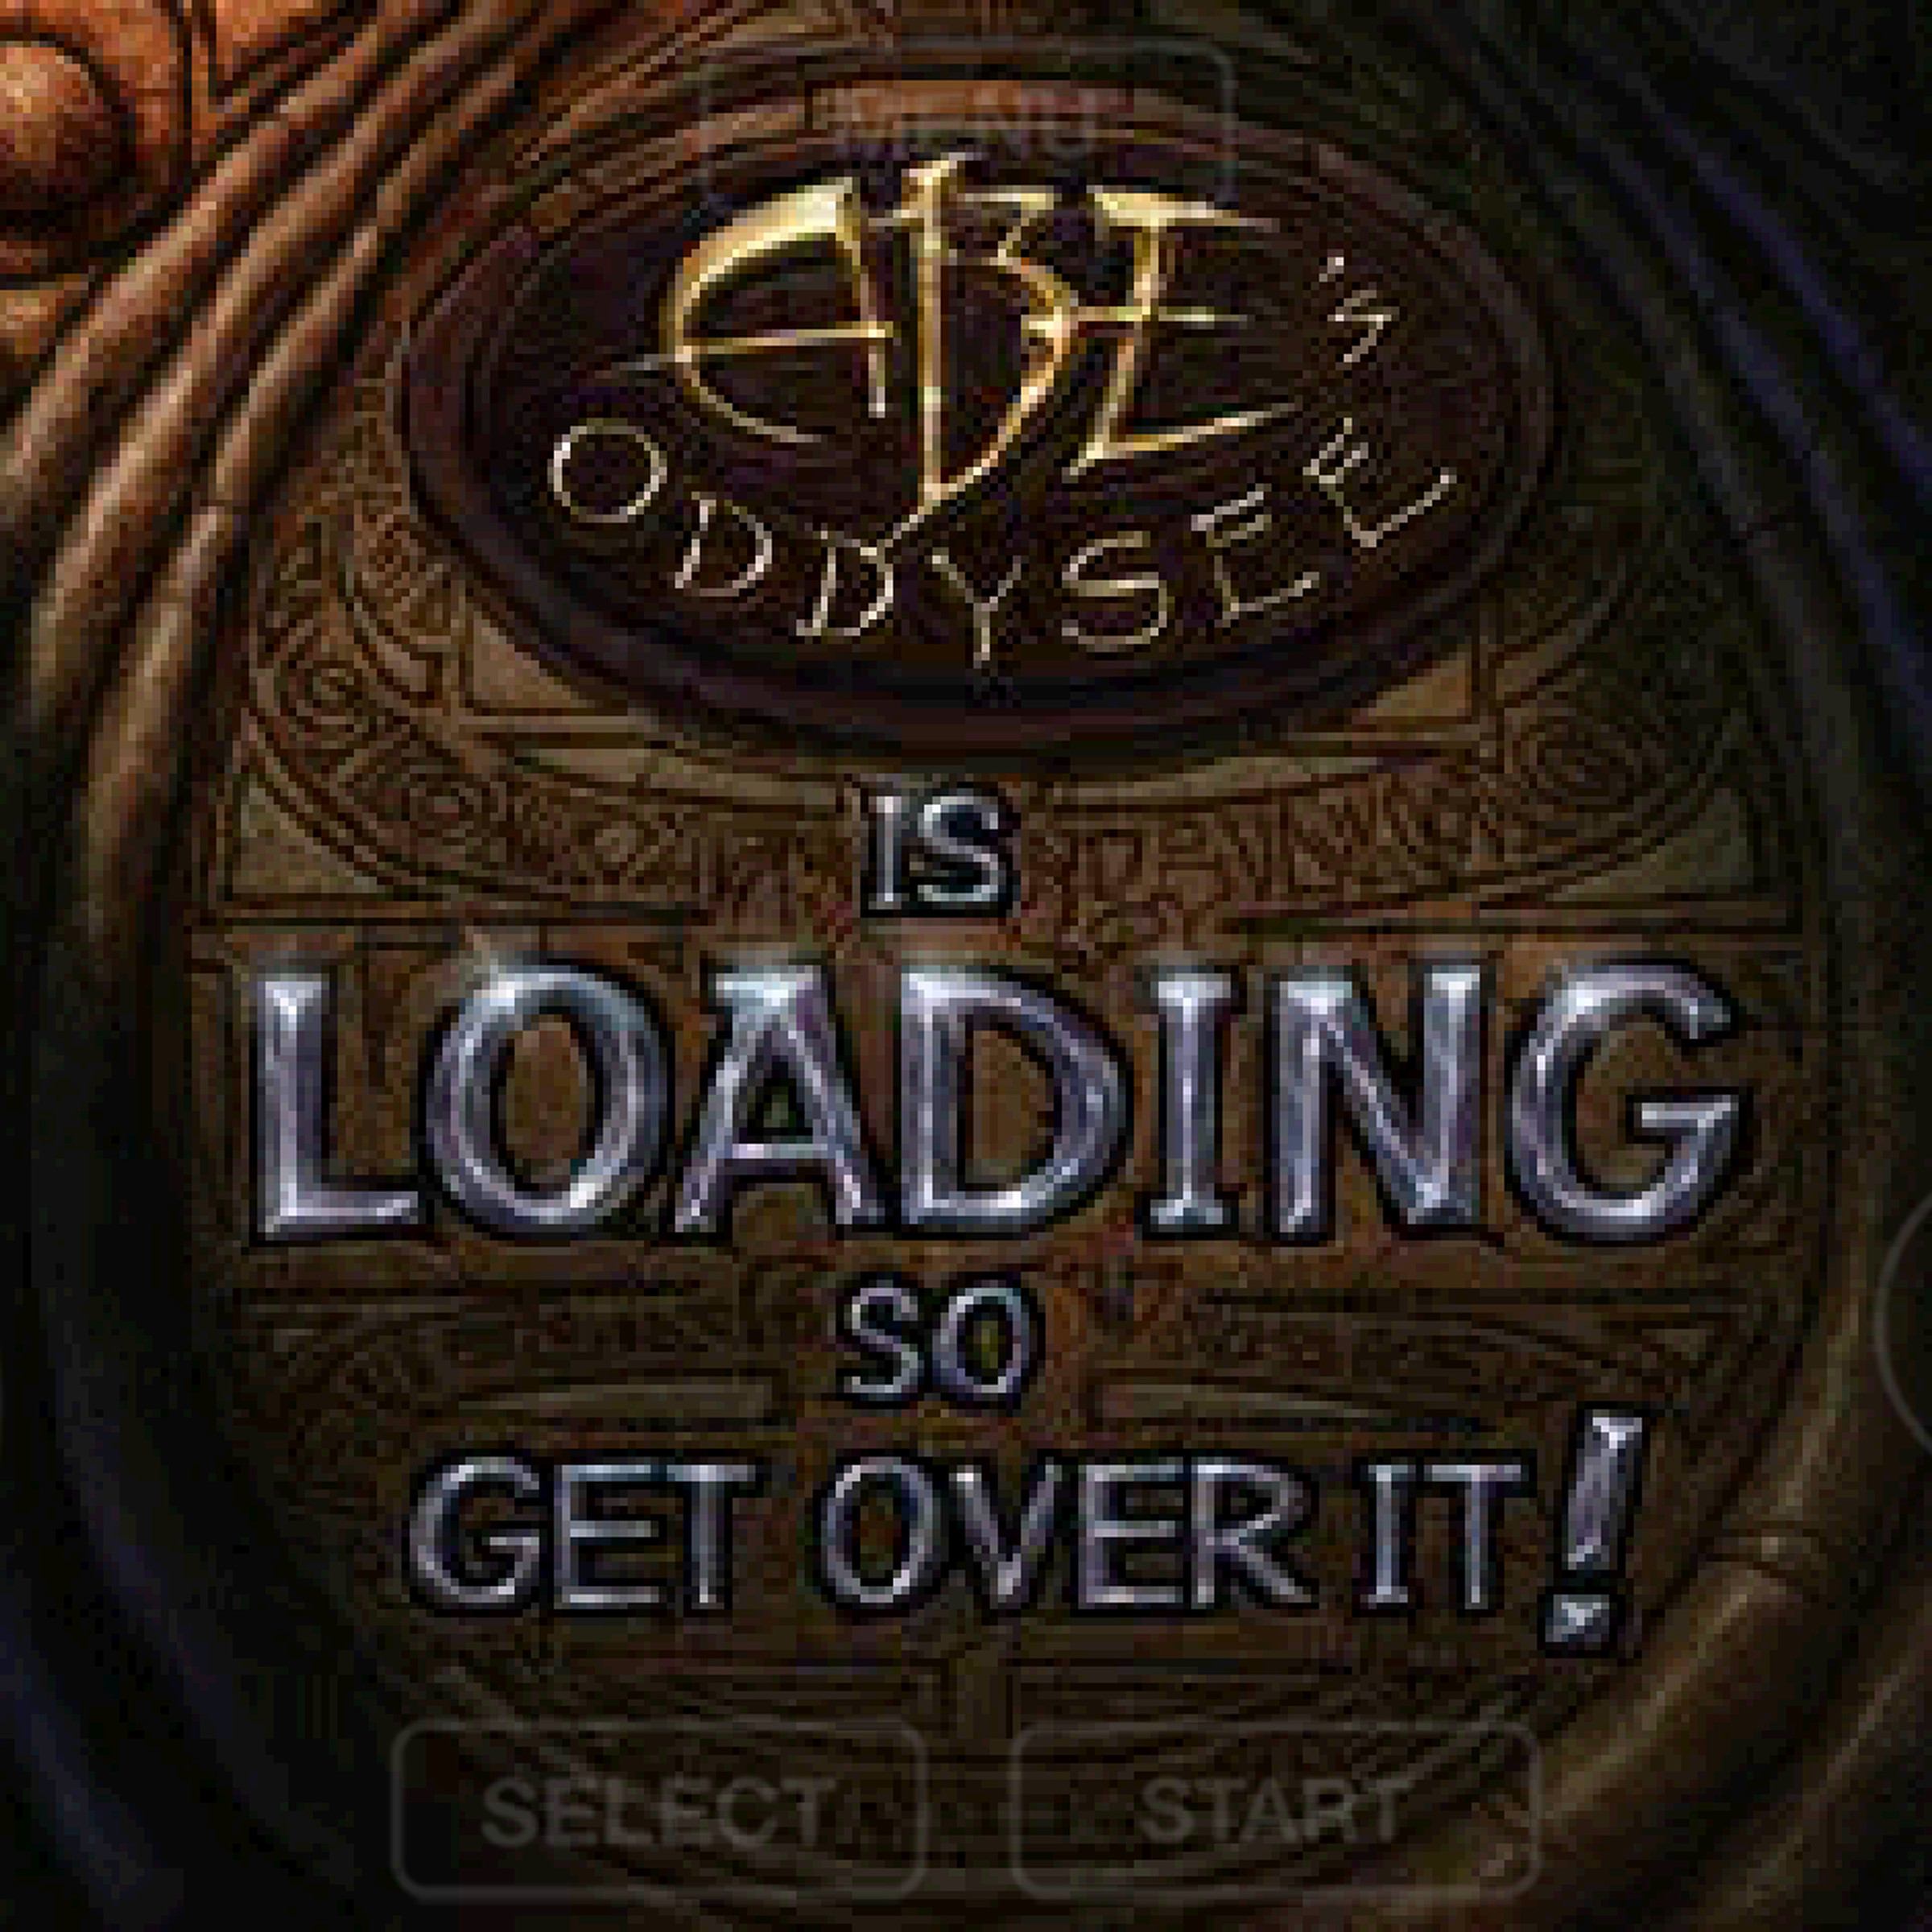 A screenshot of the loading screen from Abe’s Oddysee.